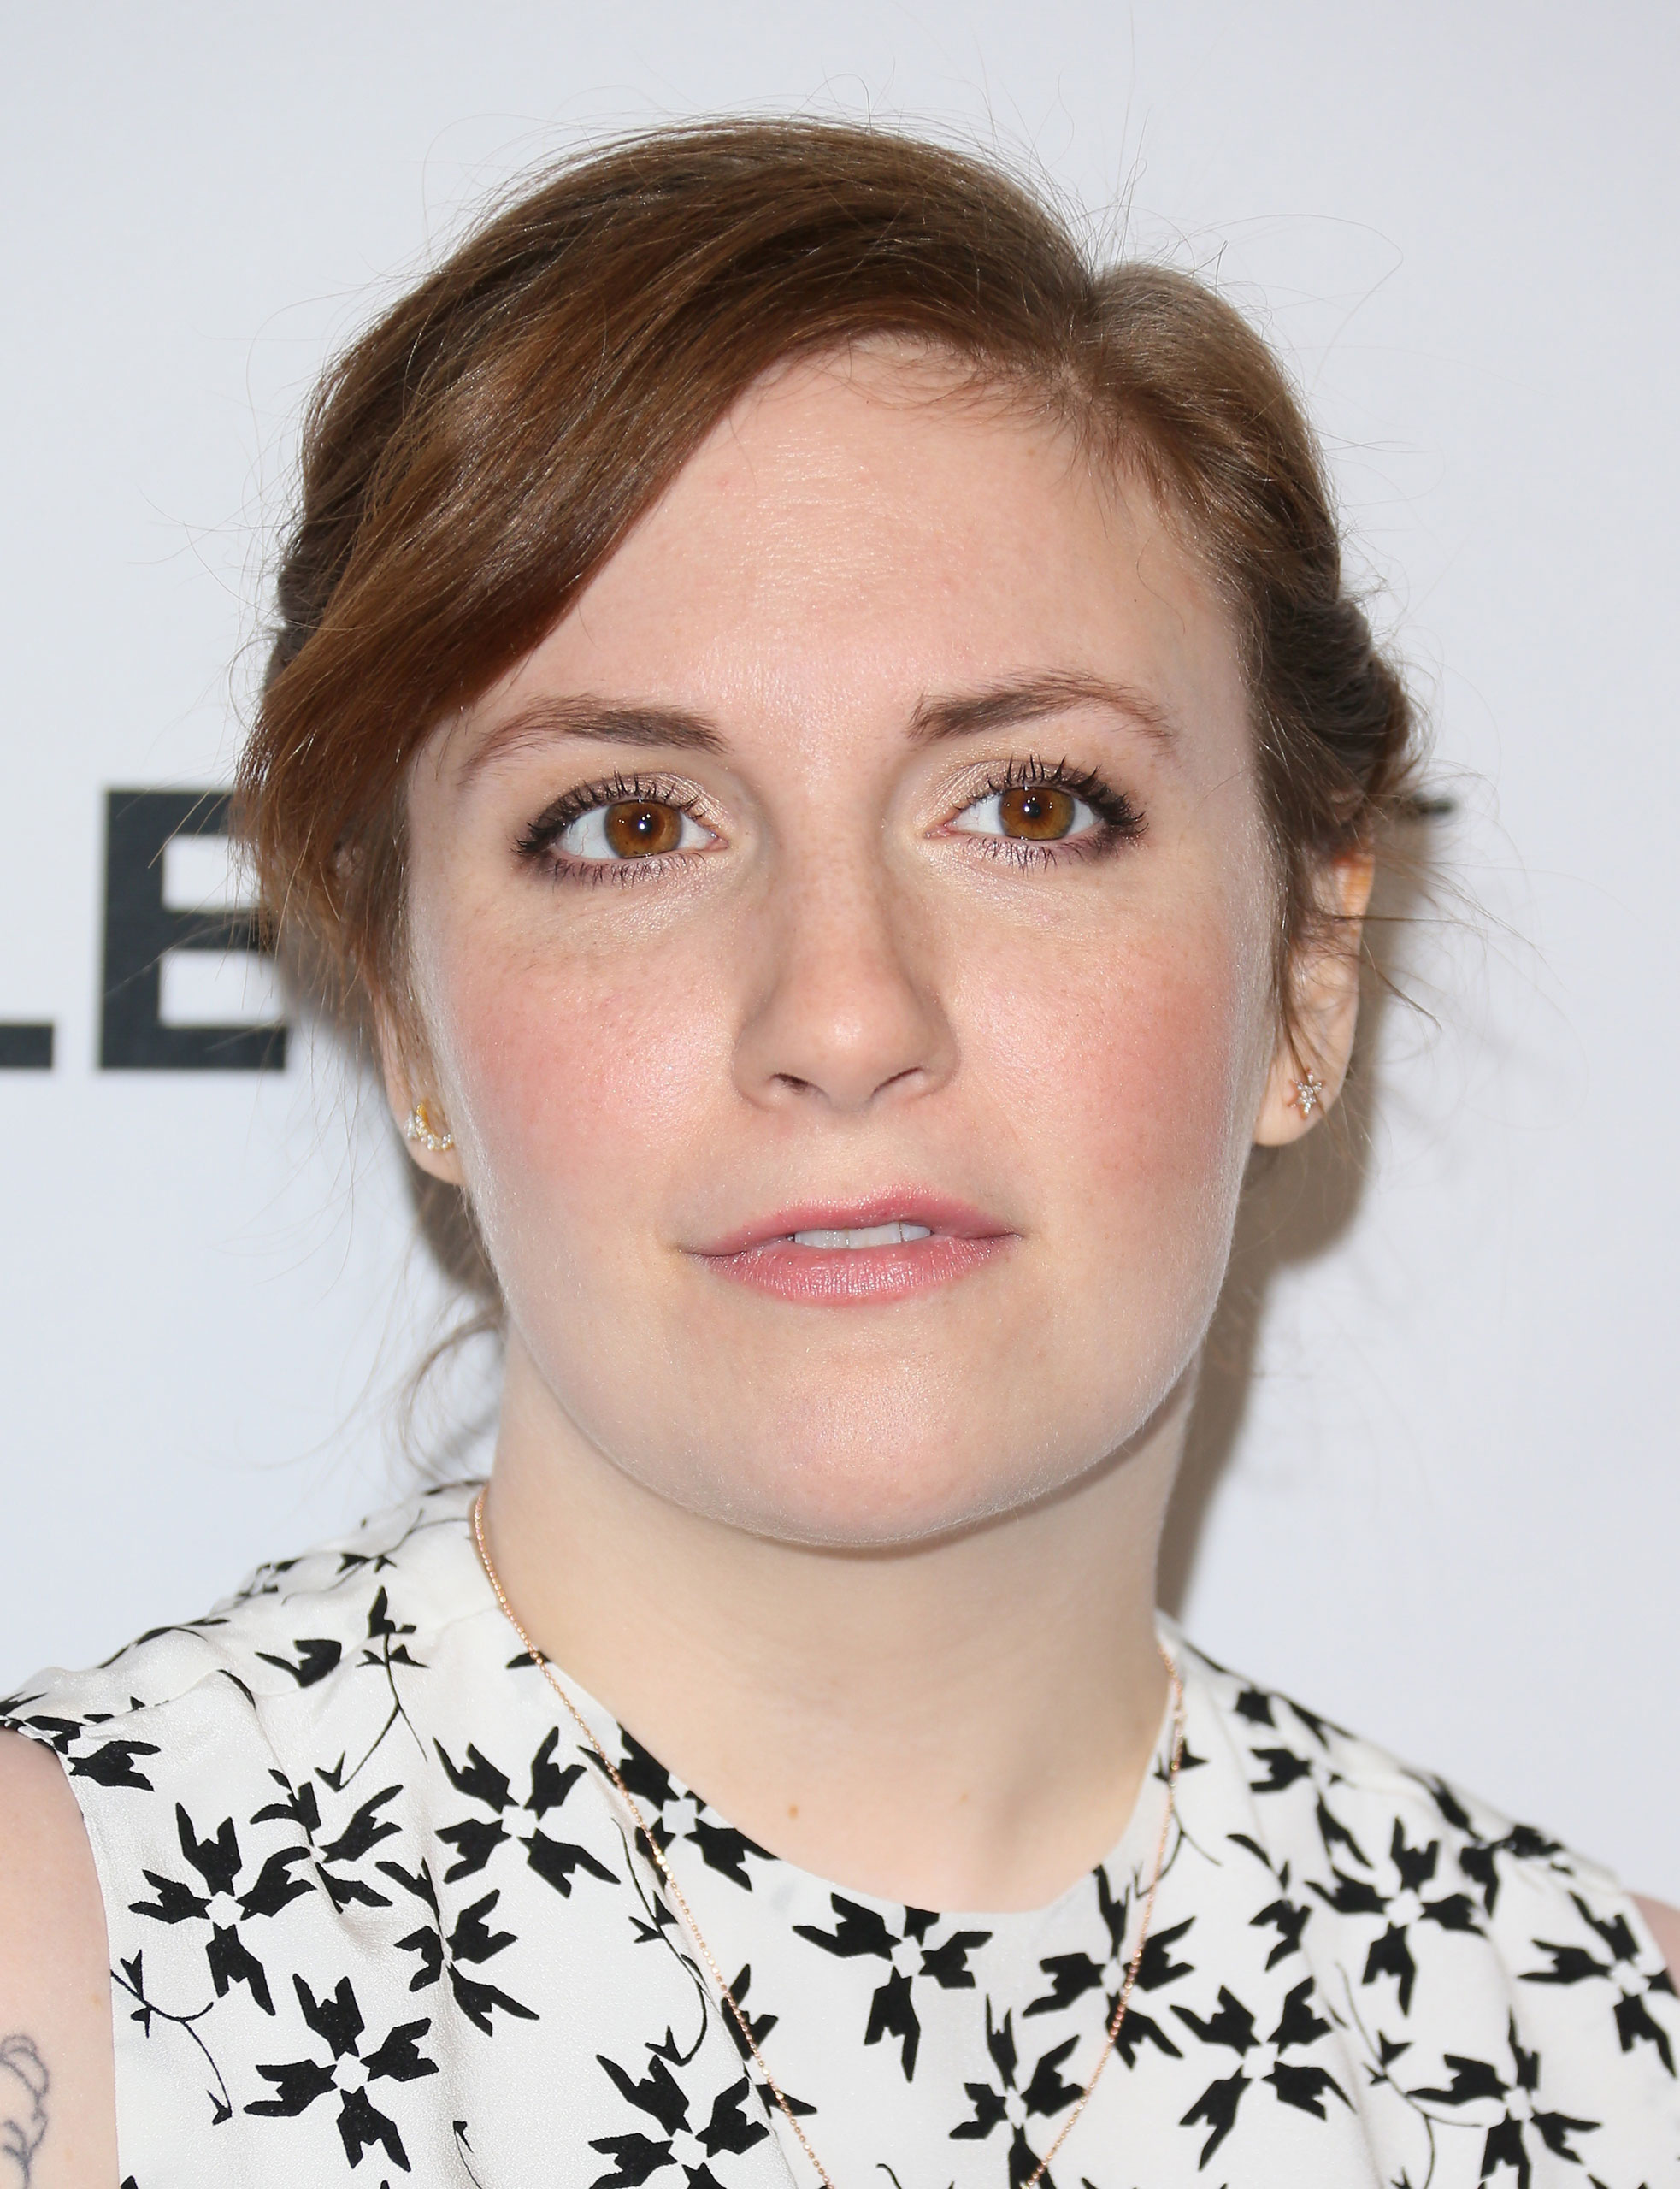 Lena Dunham at the Dolby Theatre on March 8, 2015 in Hollywood. (JB Lacroix—WireImage/Getty Images)